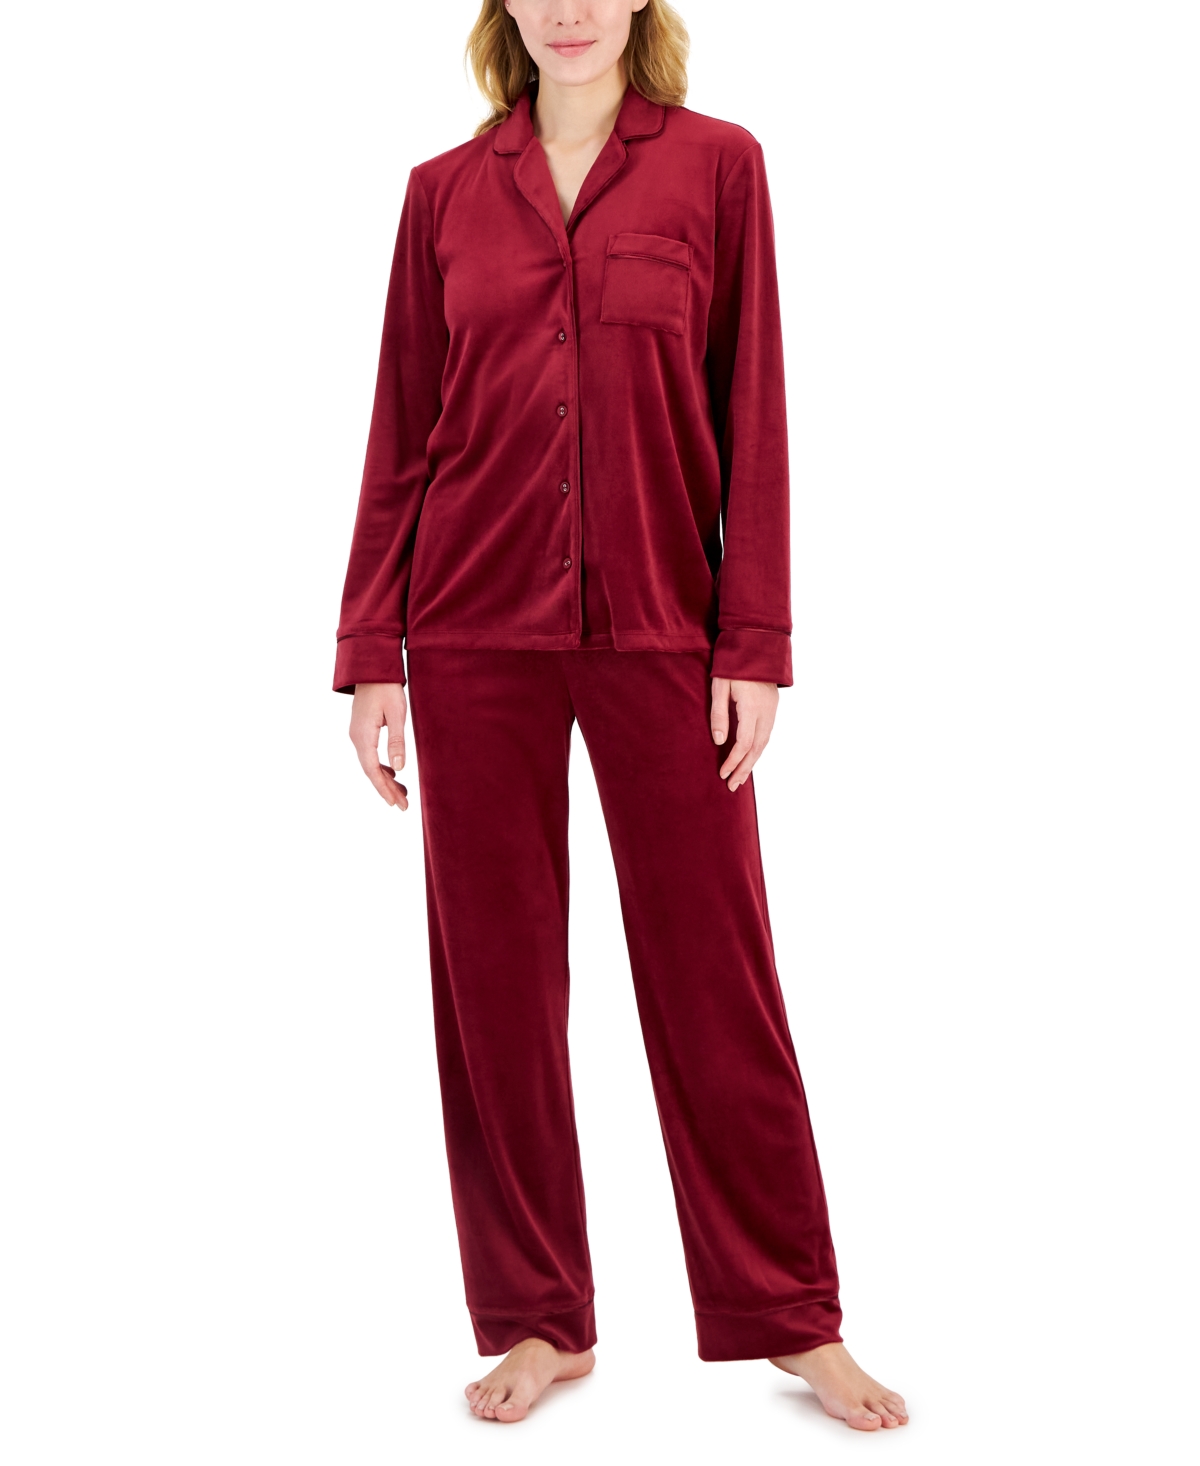 INC INTERNATIONAL CONCEPTS PLUS SIZE WOMEN'S EMBOSSED VELOUR NOTCH PACKAGED PAJAMAS SET, CREATED FOR MACY'S